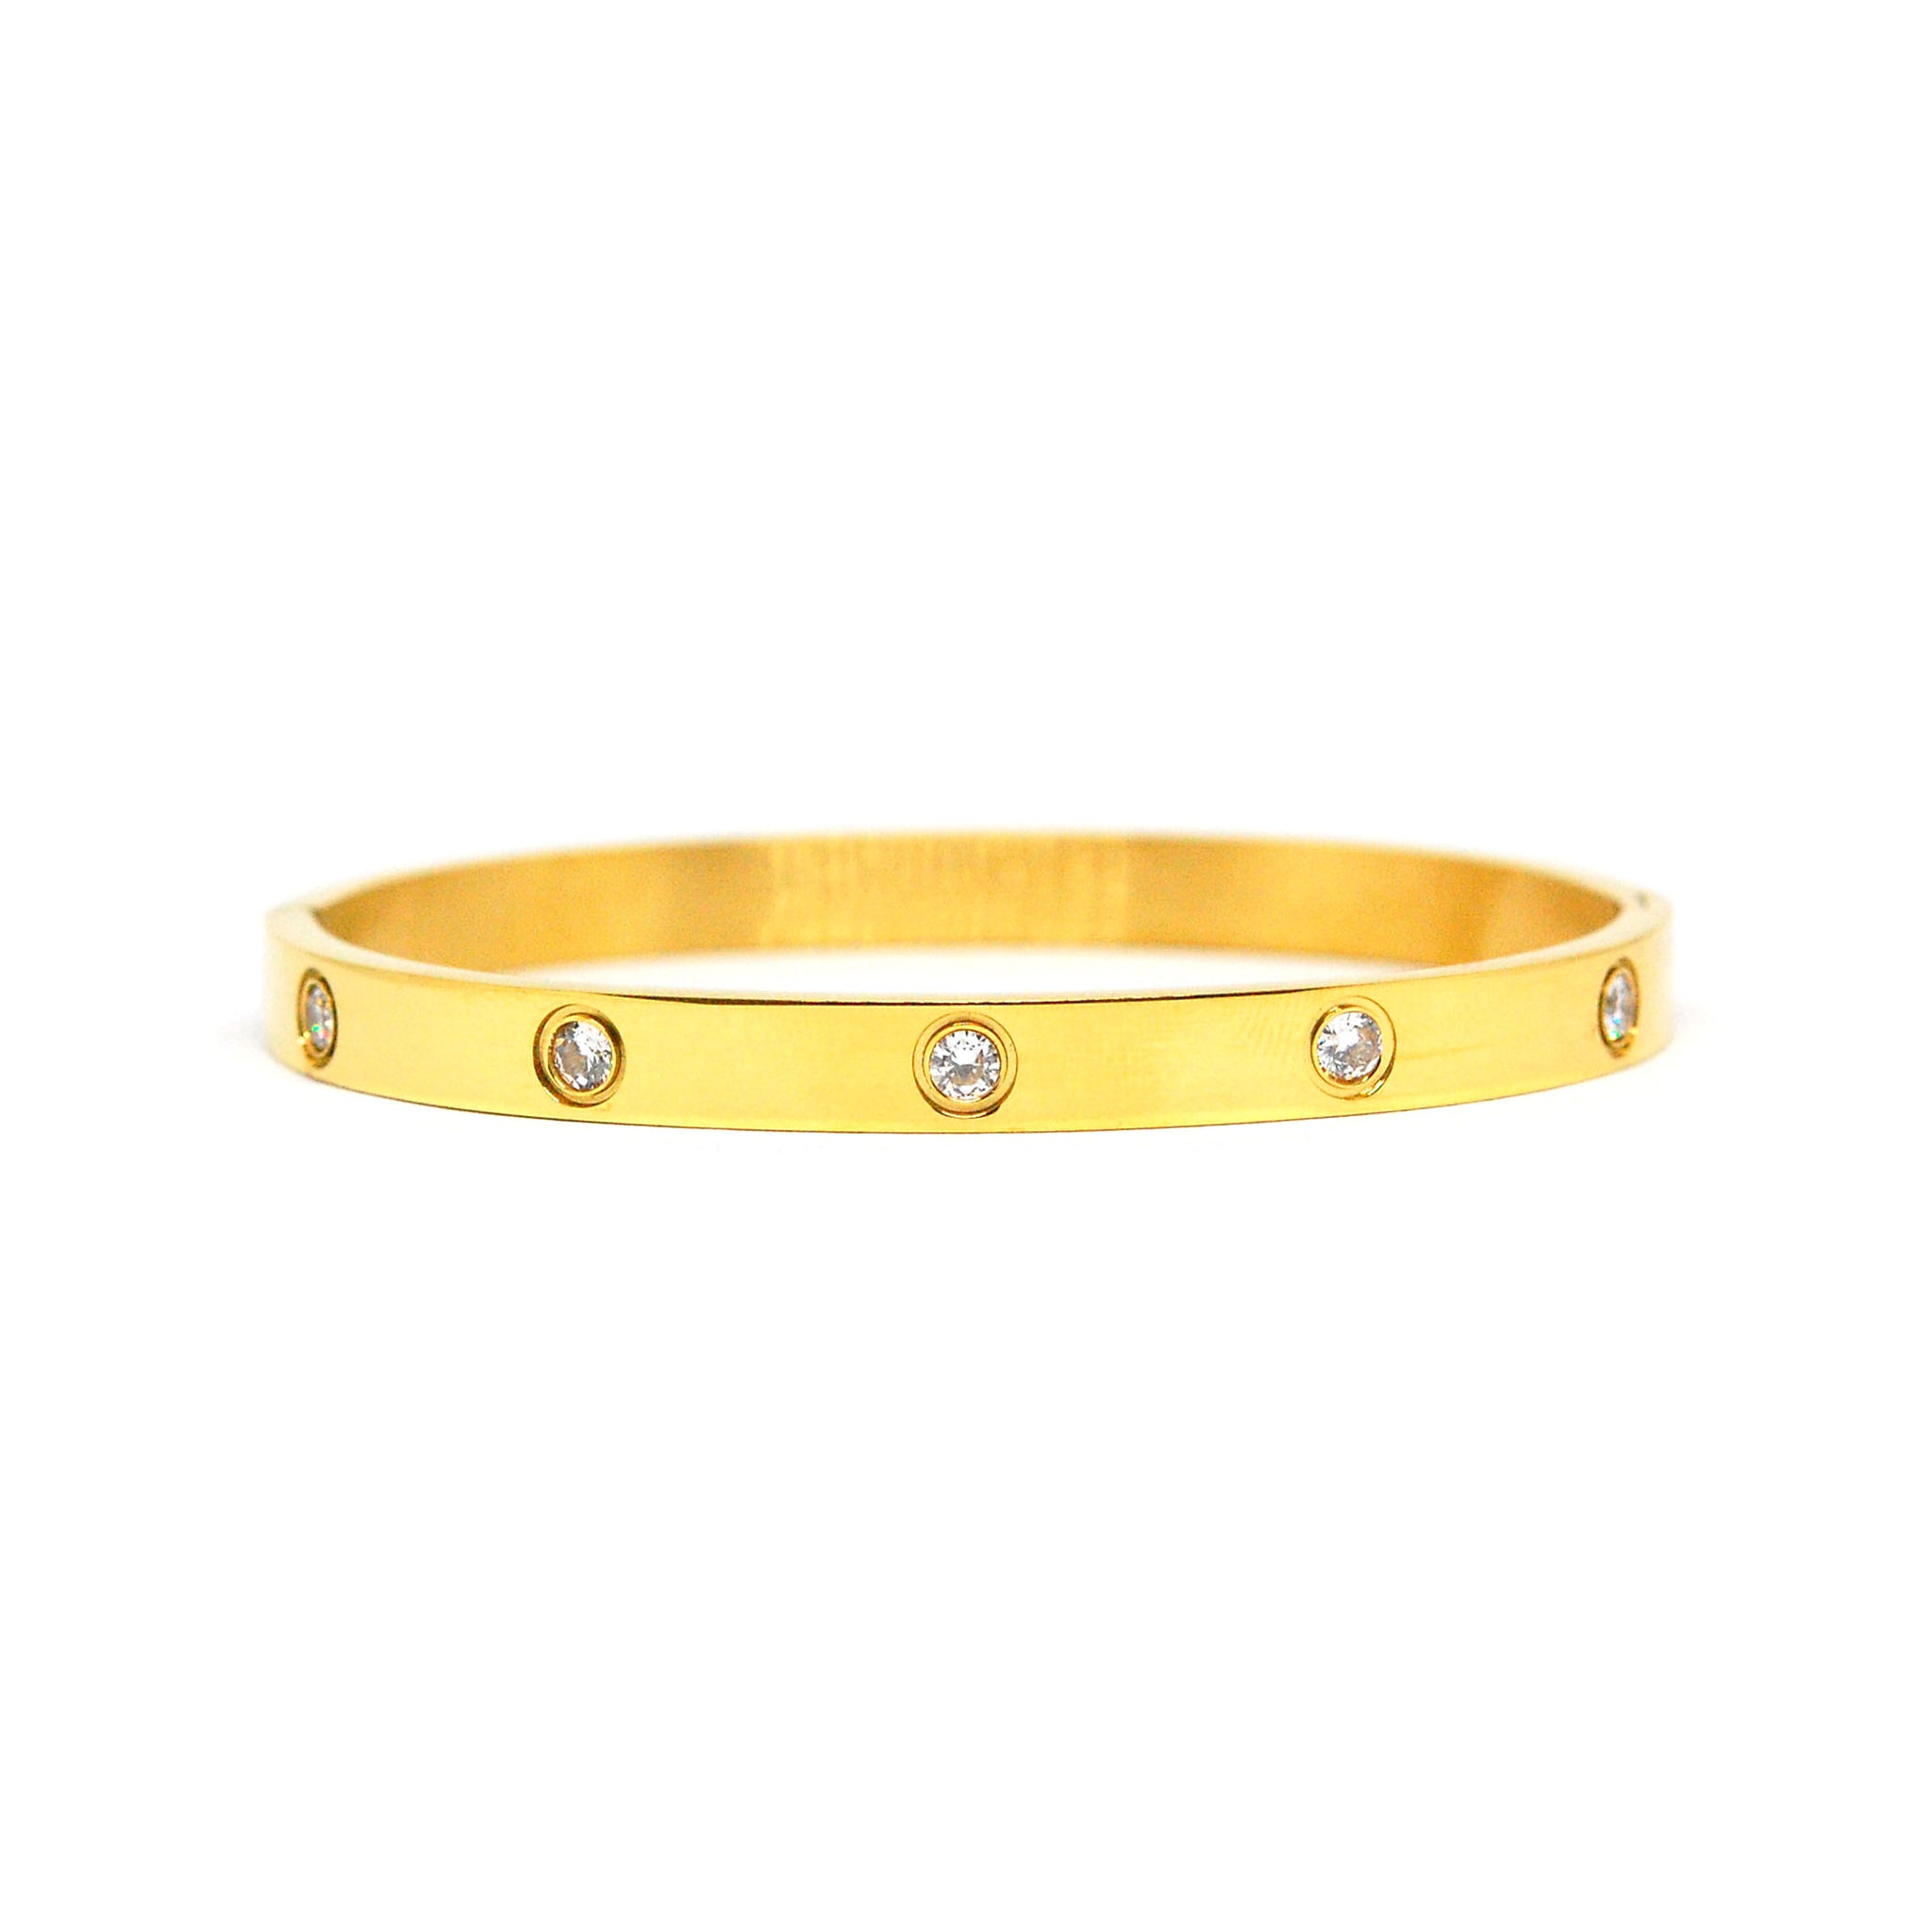 ESBG 7693: Gold-Plated 6.1mm 10-drill Bangle (Openable w/o SD)